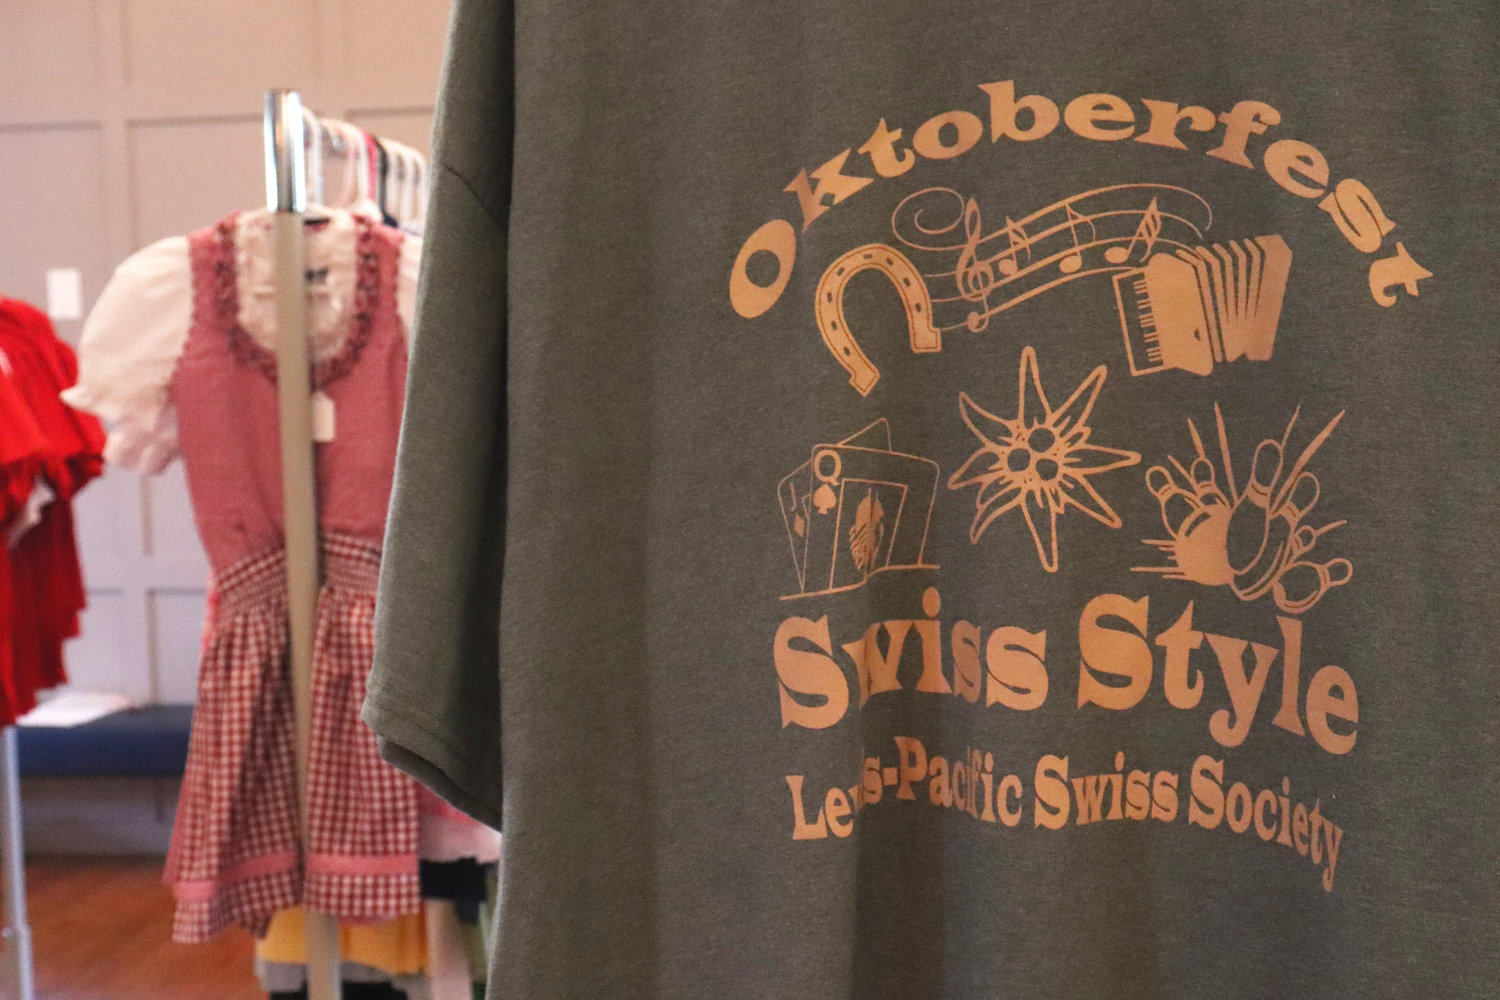 An official Lewis-Pacific Swiss Society Oktoberfest shirt hangs on display in Swiss Hall on Saturday.